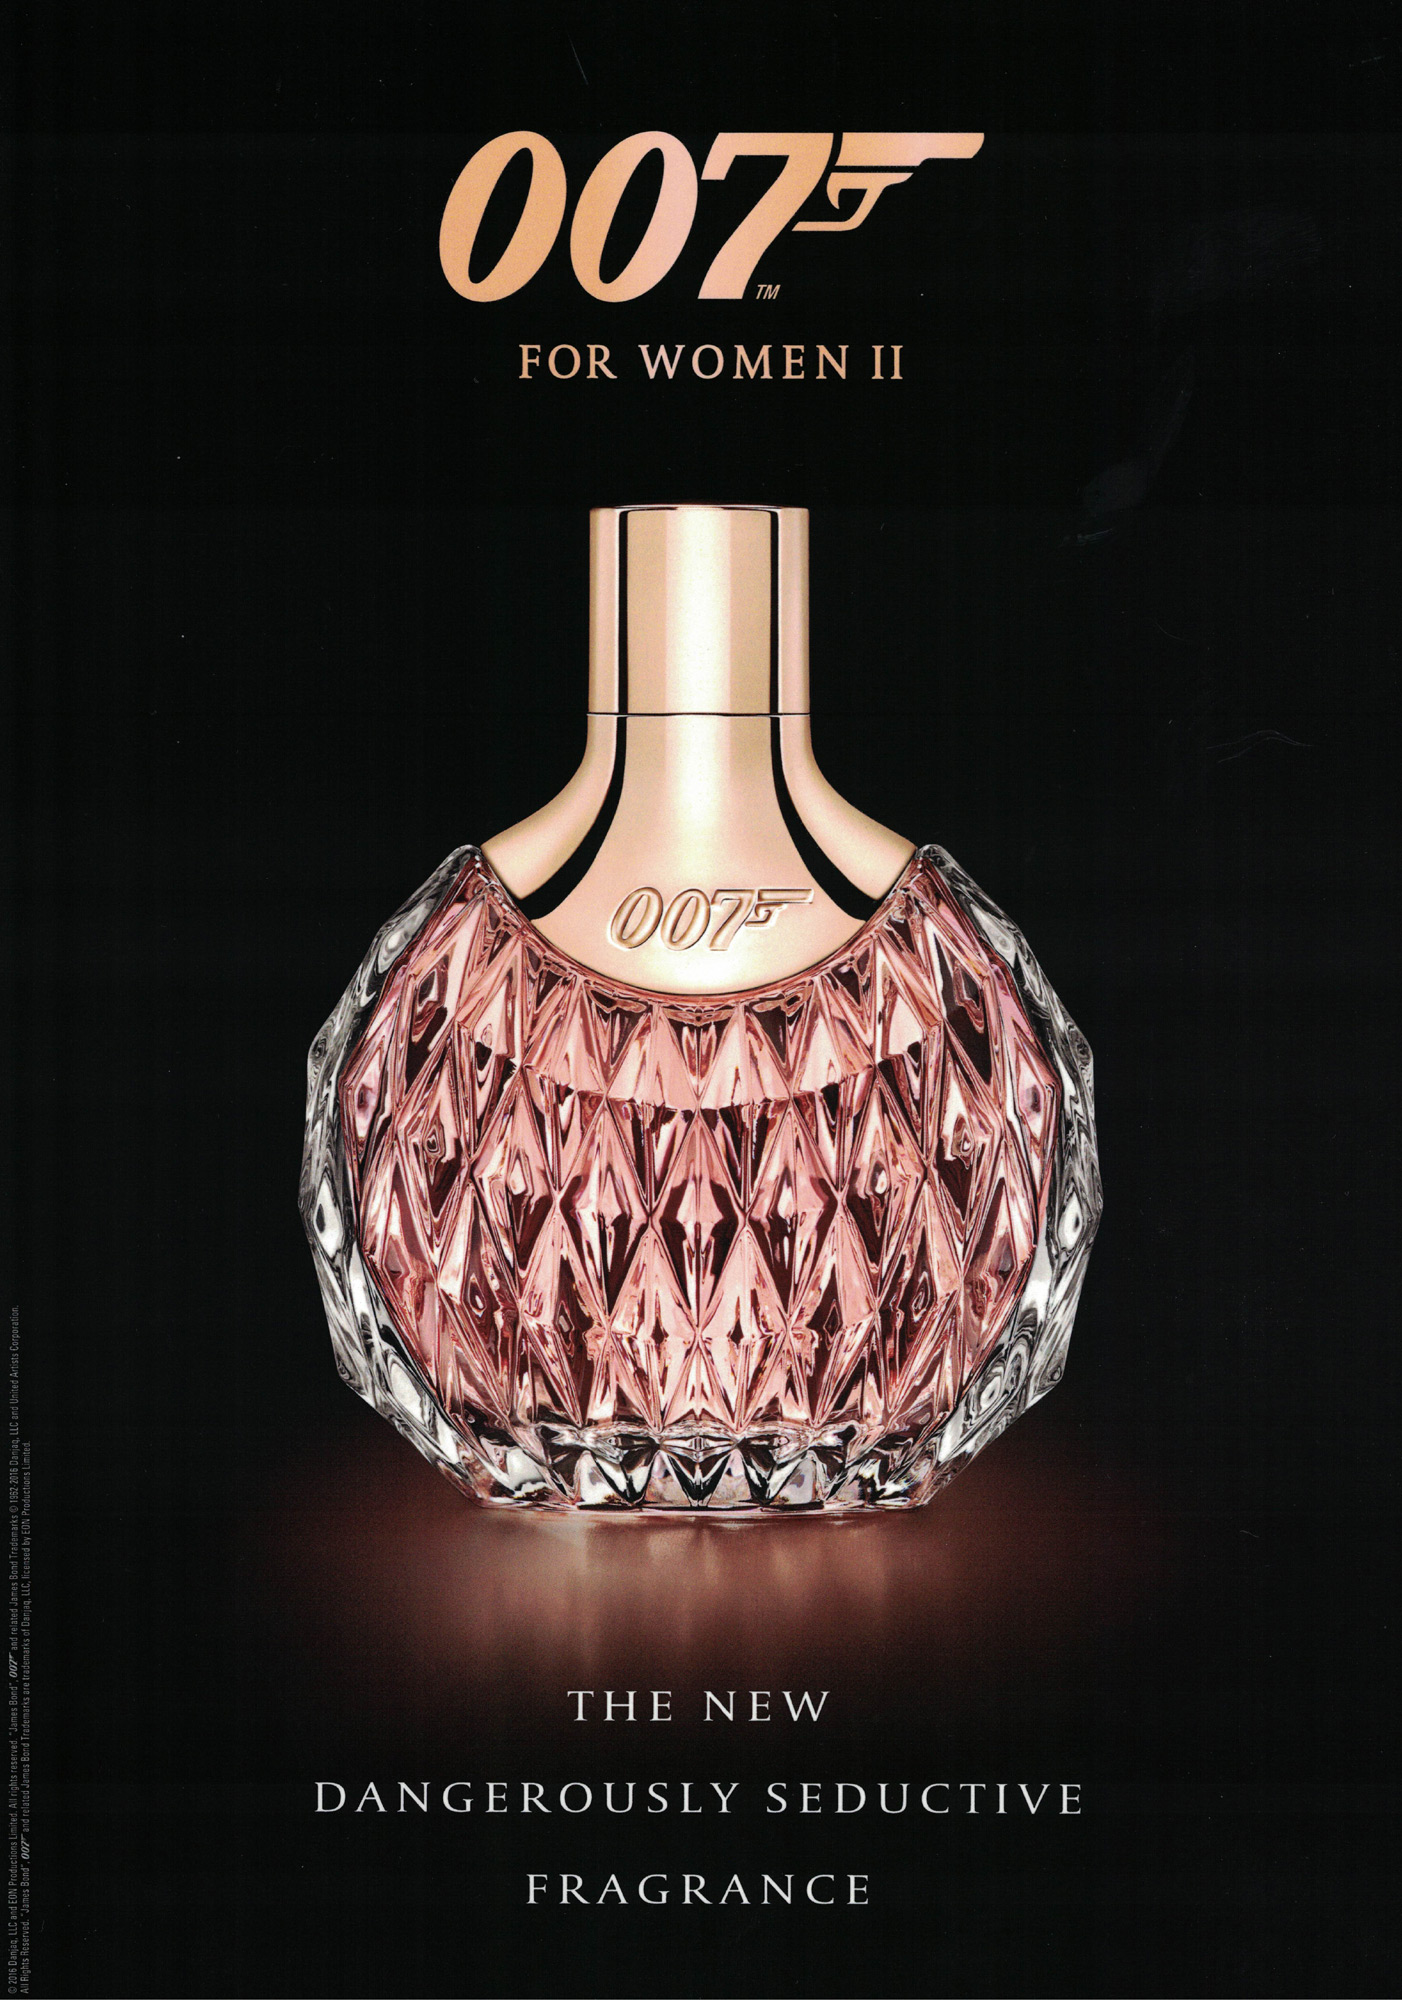 James Bond 007 for Women II Eon Productions perfume - a new fragrance